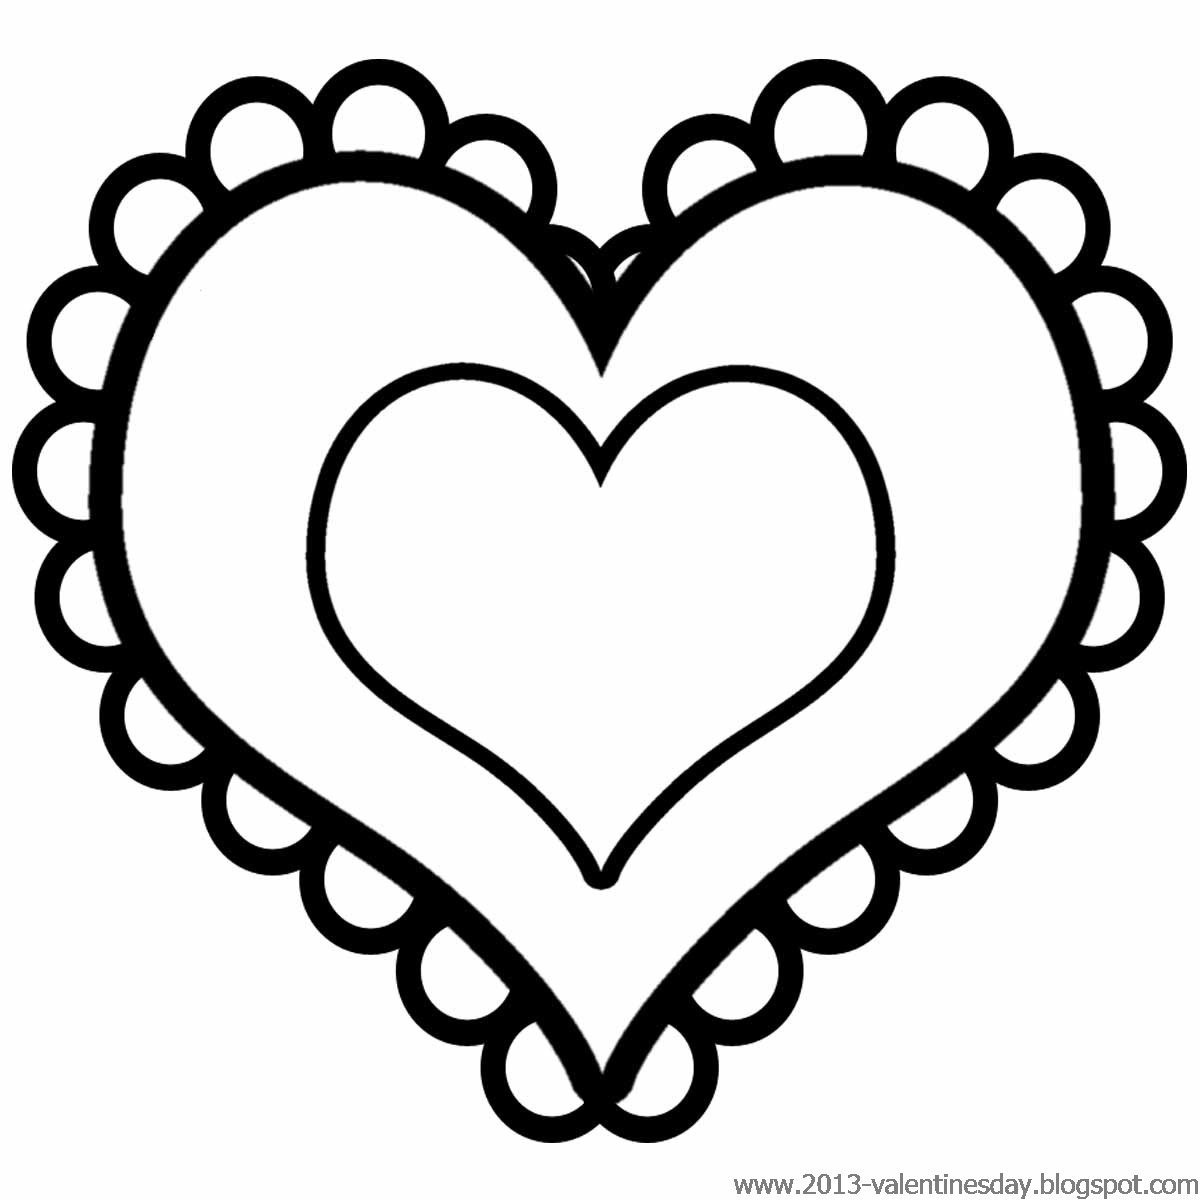 Heart Clipart Black And White